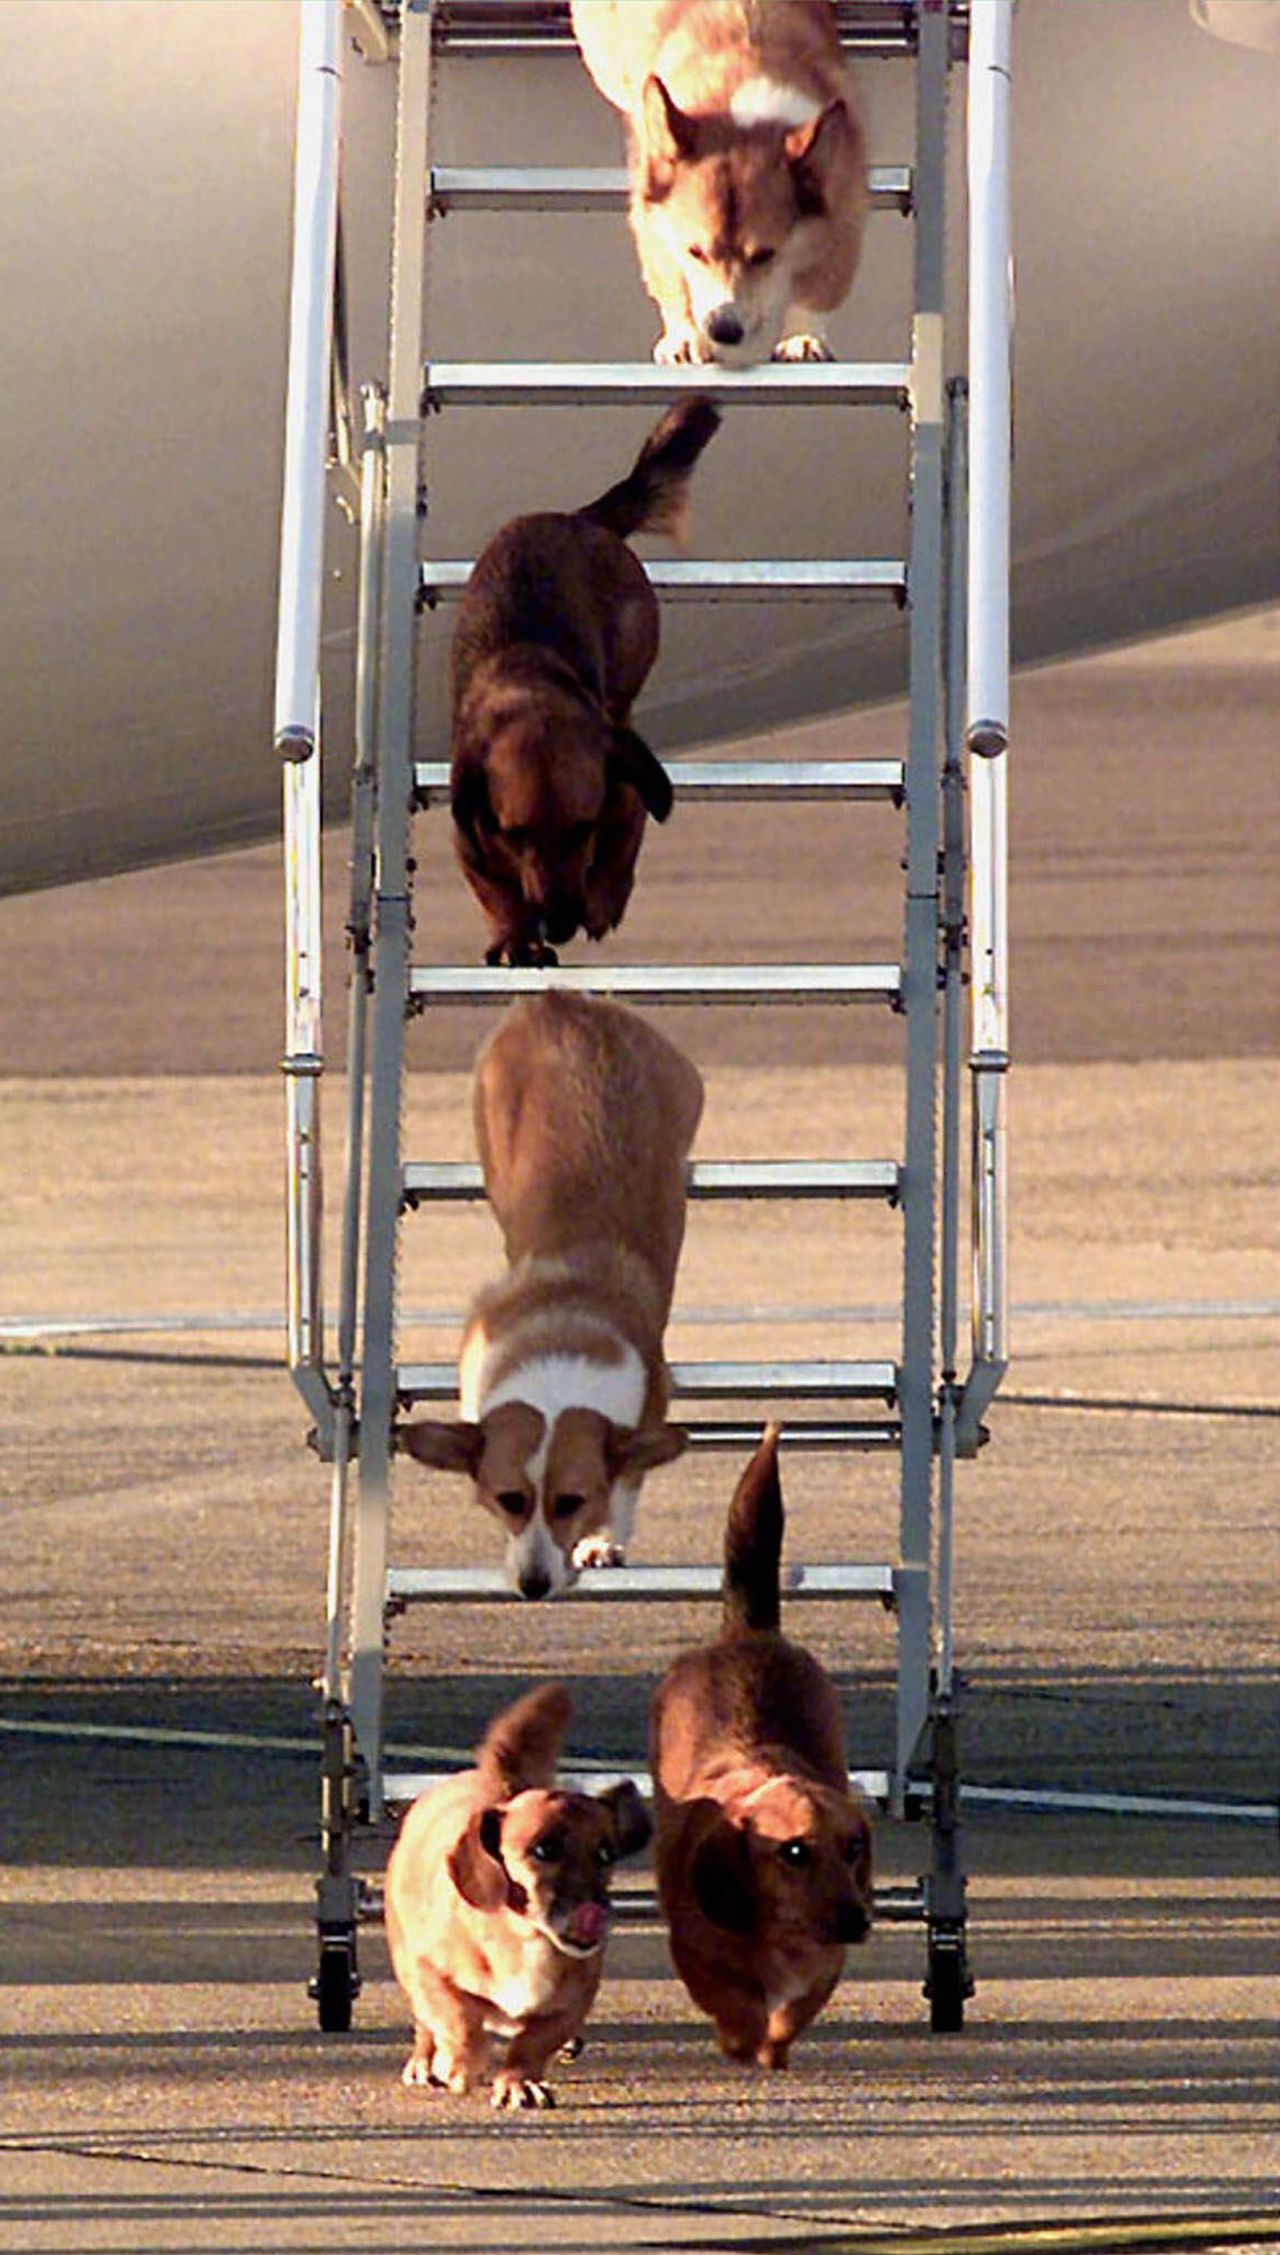 The Queen's dogs exit an aircraft after a flight to London in 1998.